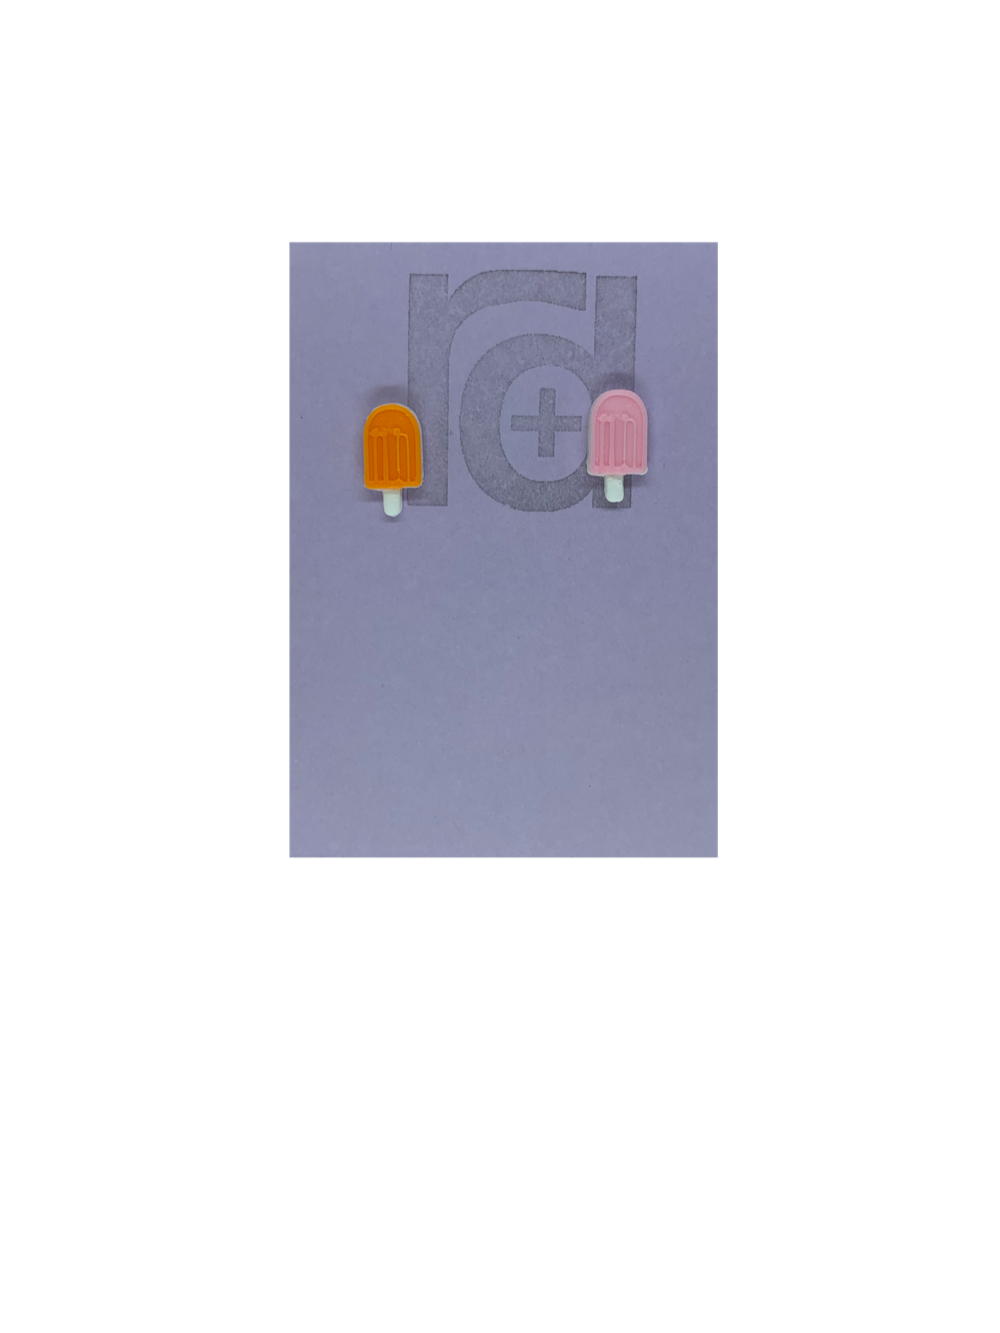 Two small and detailed R+D earrings are shown on a purple earring card. They are shaped as popsicles with white sticks. The earrings are mismatched, one popsicle is a vibrant orange and one is light pink